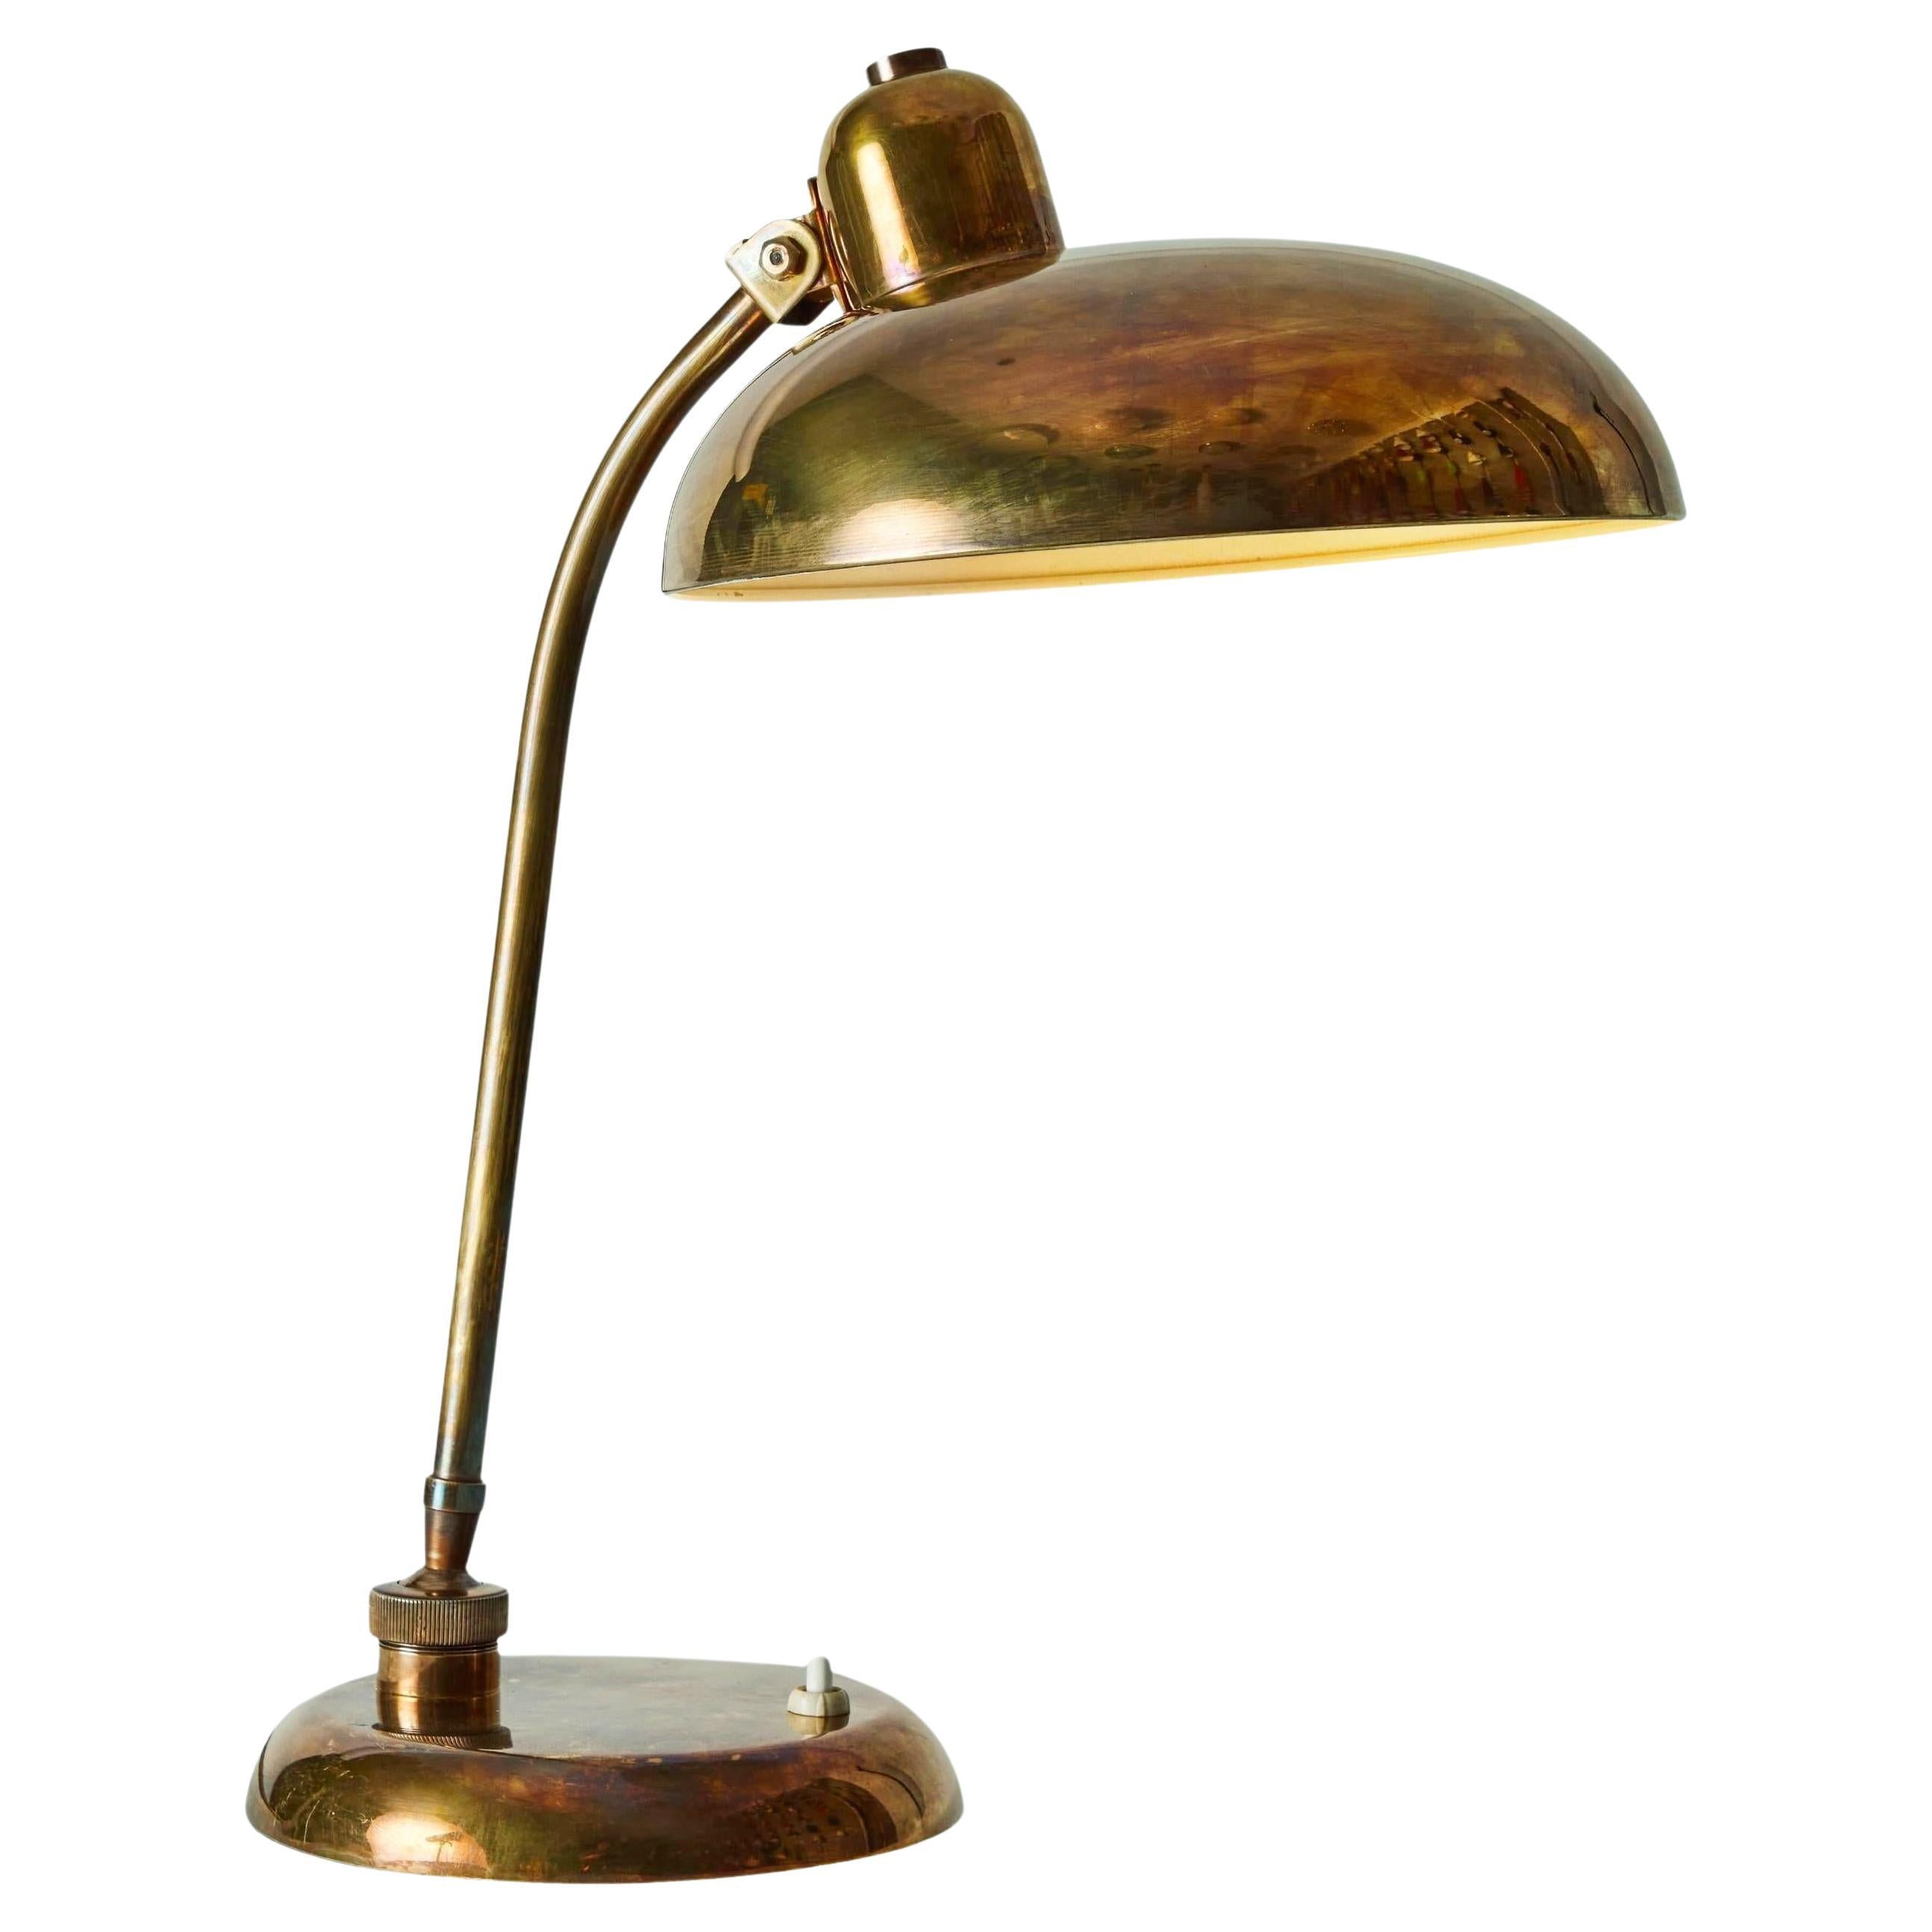 1940s Giovanni Michelucci Patinated Brass Ministerial Table Lamp for Lariolux For Sale